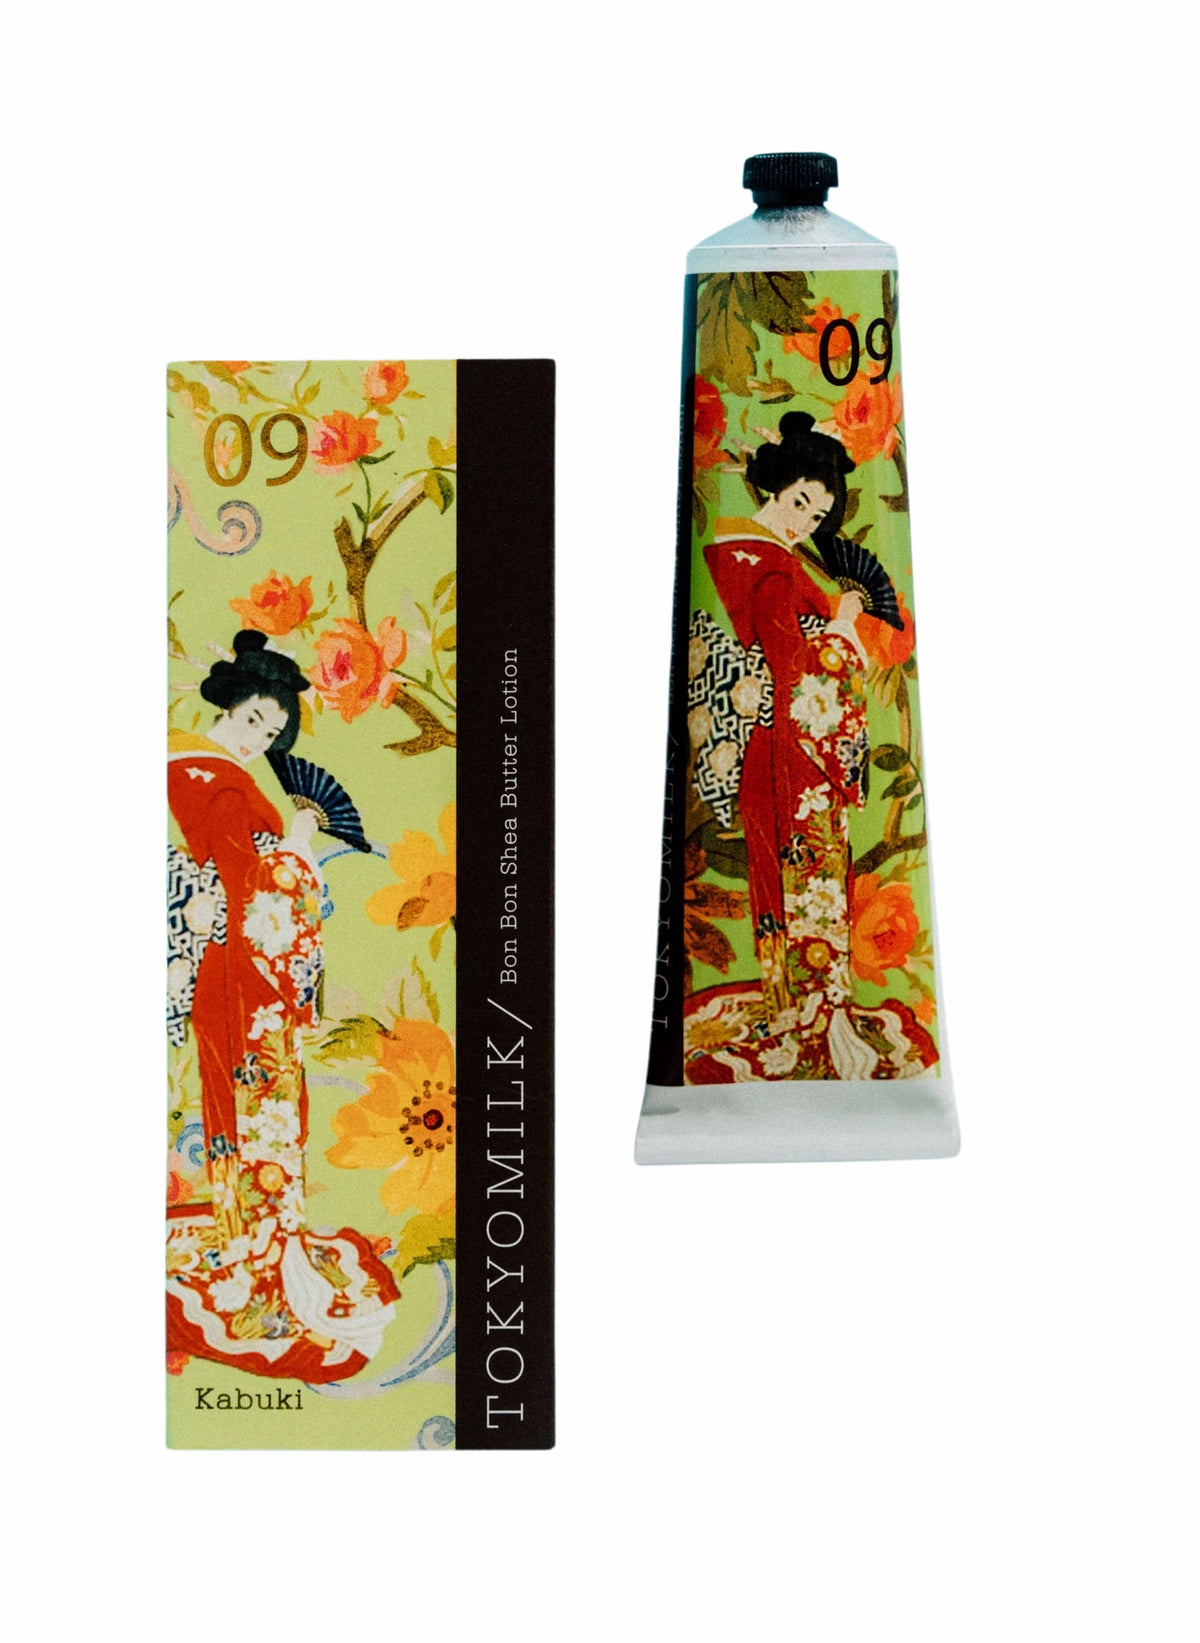 Image of a Margot Elena TokyoMilk Kabuki No. 9 Bon Bon Shea Butter Lotion packaging and tube decorated with a colorful floral design and a traditional Japanese kabuki female character in a red kimono, infused with Japanese Green Tea.